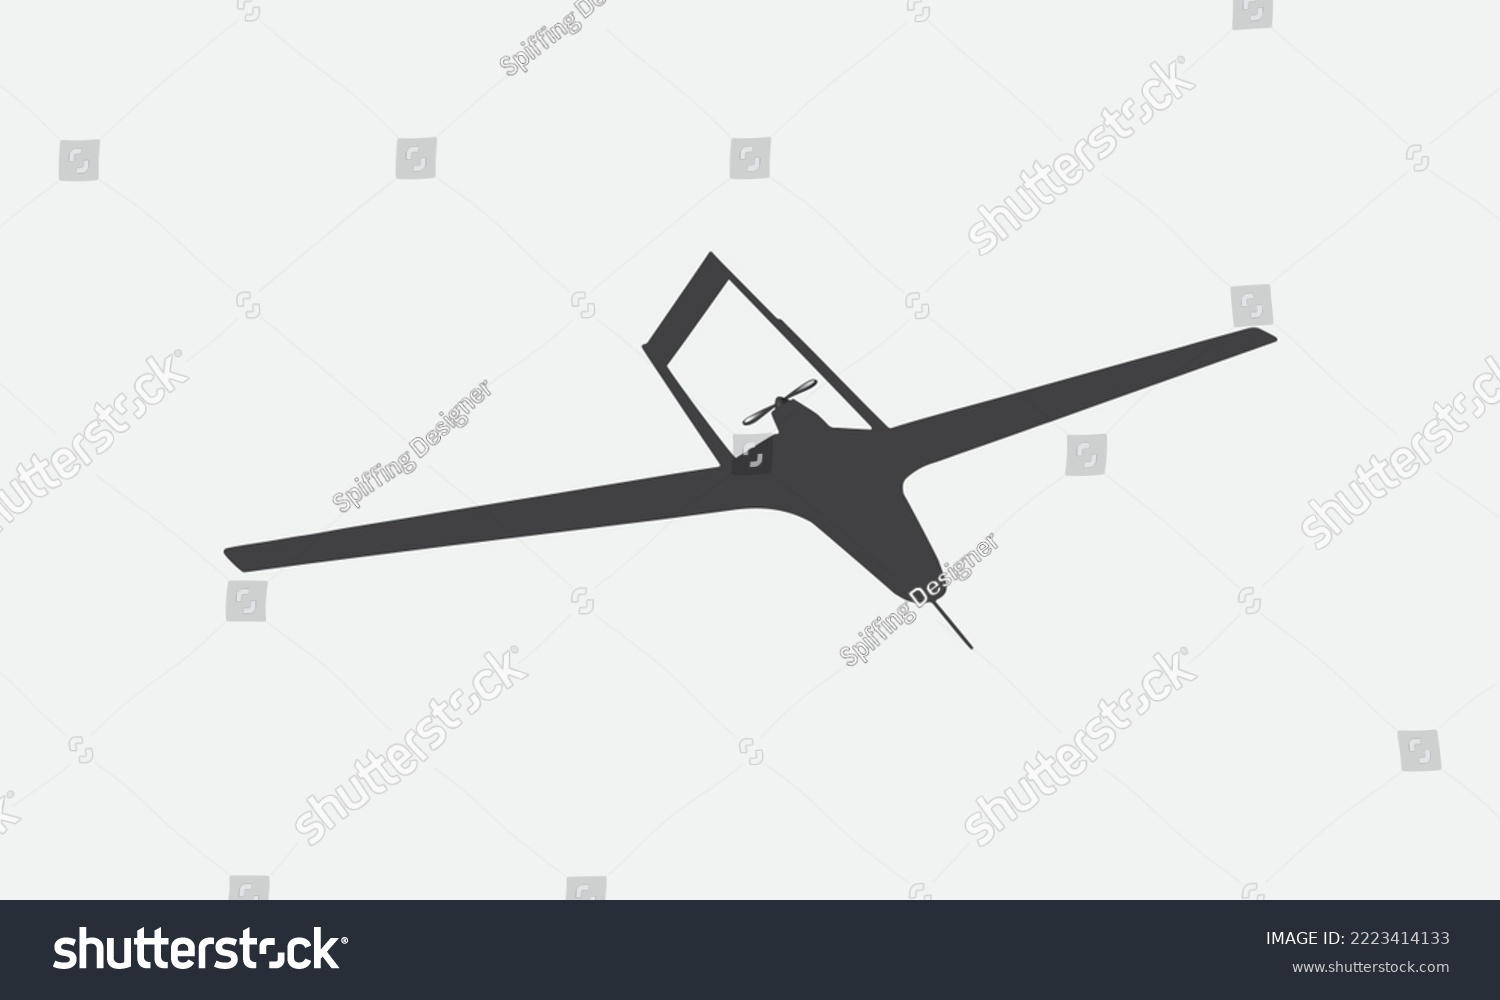 SVG of Bayraktar TB2 unmanned aerial vehicle SIHA silhouette vector on a white background.Vector drawing of unmanned combat aerial vehicle. Side view. Image for illustration and infographics. svg